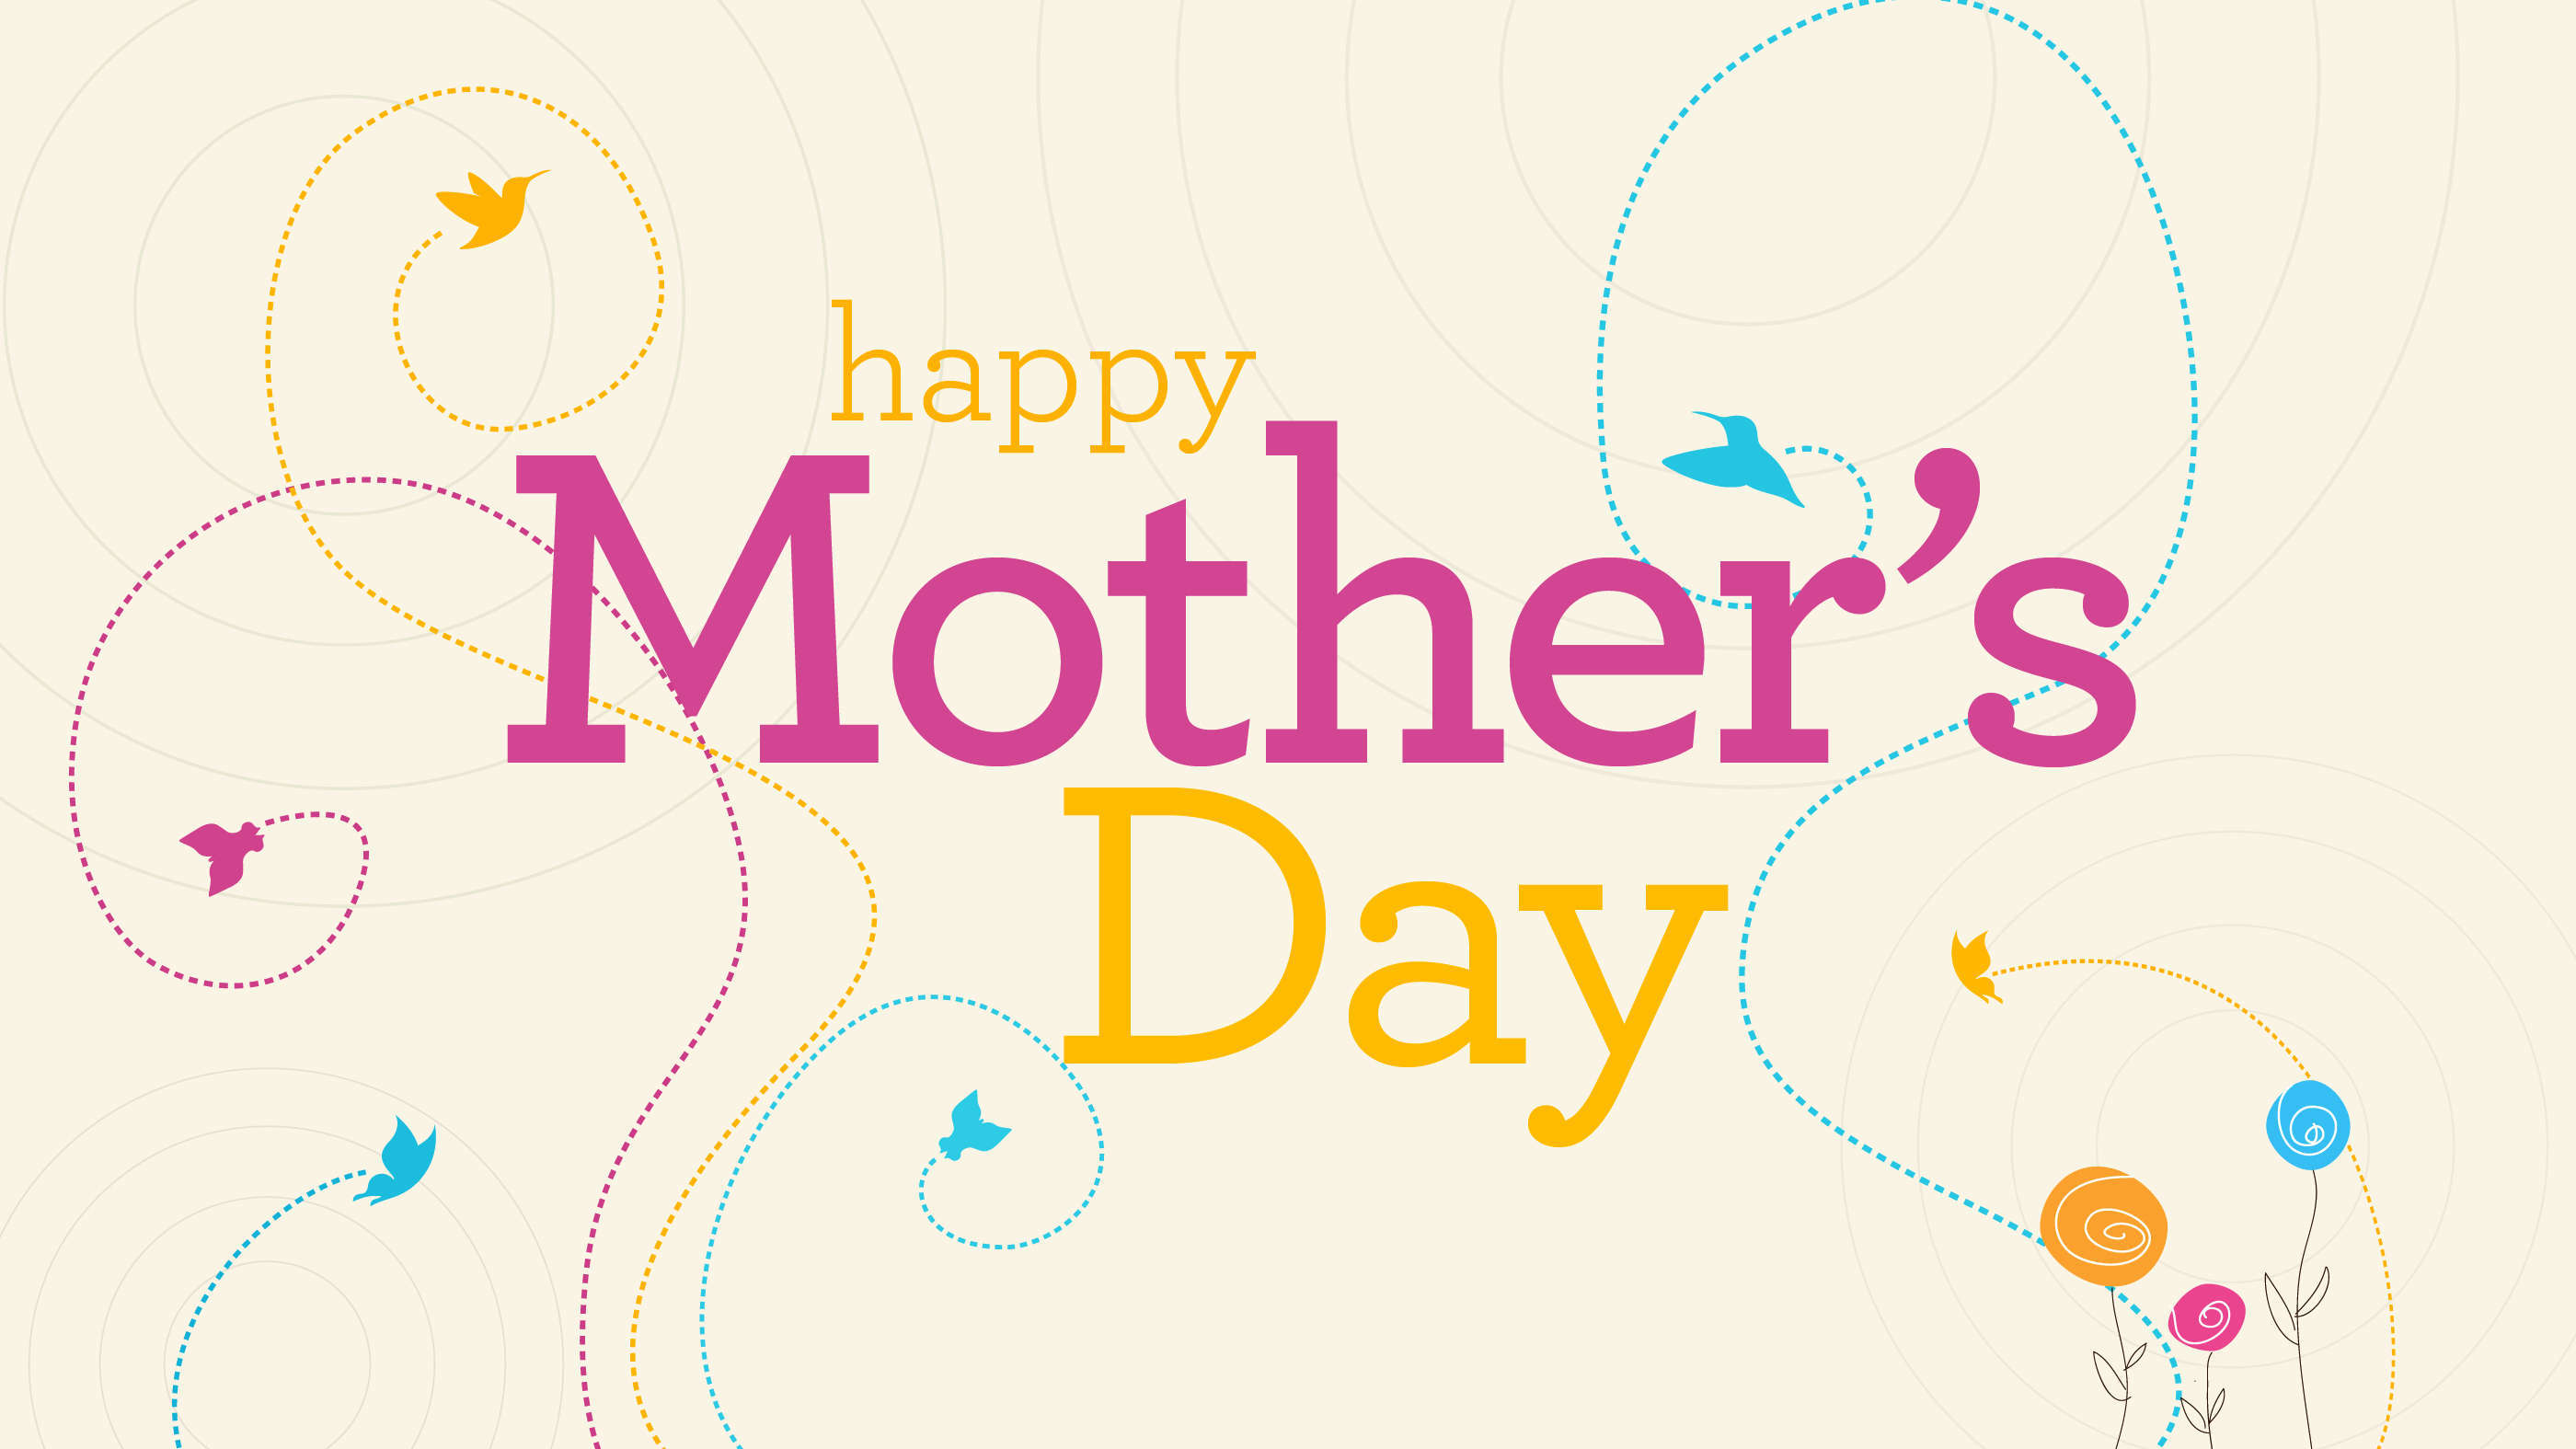 Wallpaper  Cute Mothers Day Hd Wallpaper  Upload At May 4 2014 By